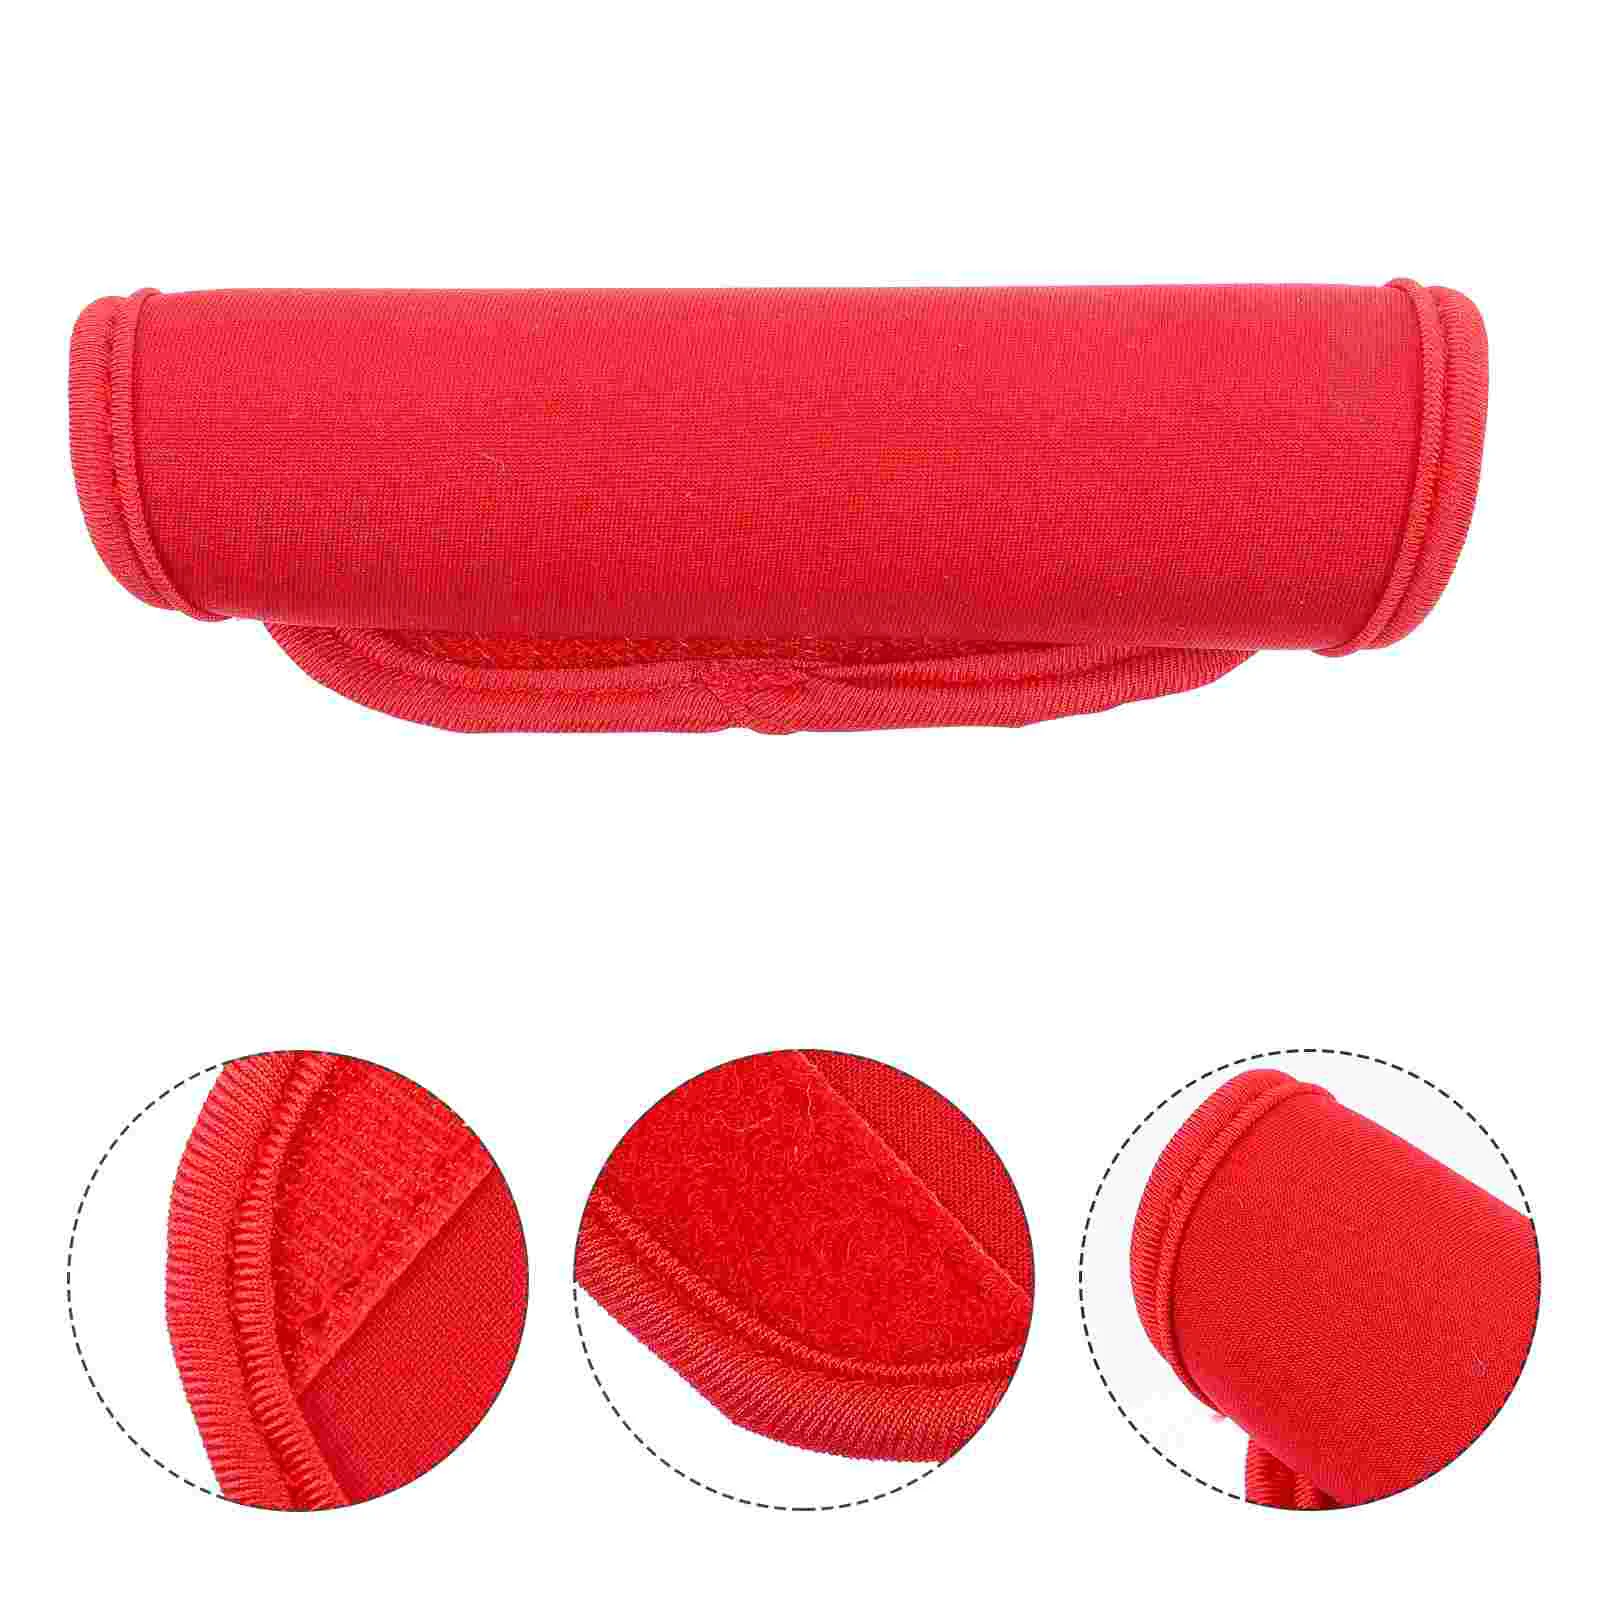 

Handle Luggage Wraps Wrap Suitcase Neoprene Covers Travel Grip Case Identifiers Tags Protector Identifier Supplies Grips Sleeves